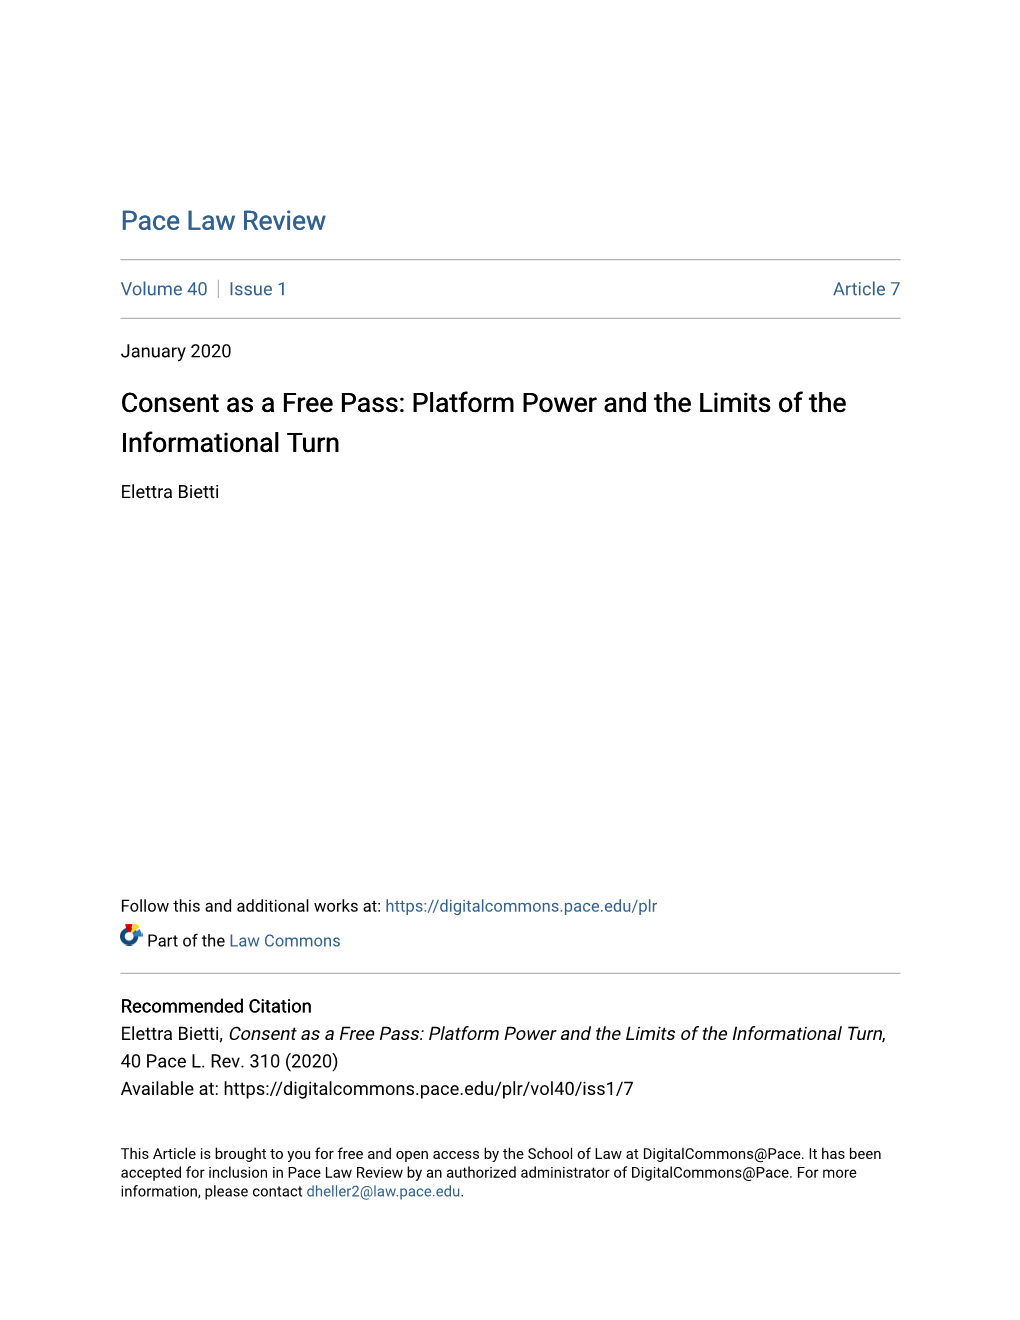 Consent As a Free Pass: Platform Power and the Limits of the Informational Turn